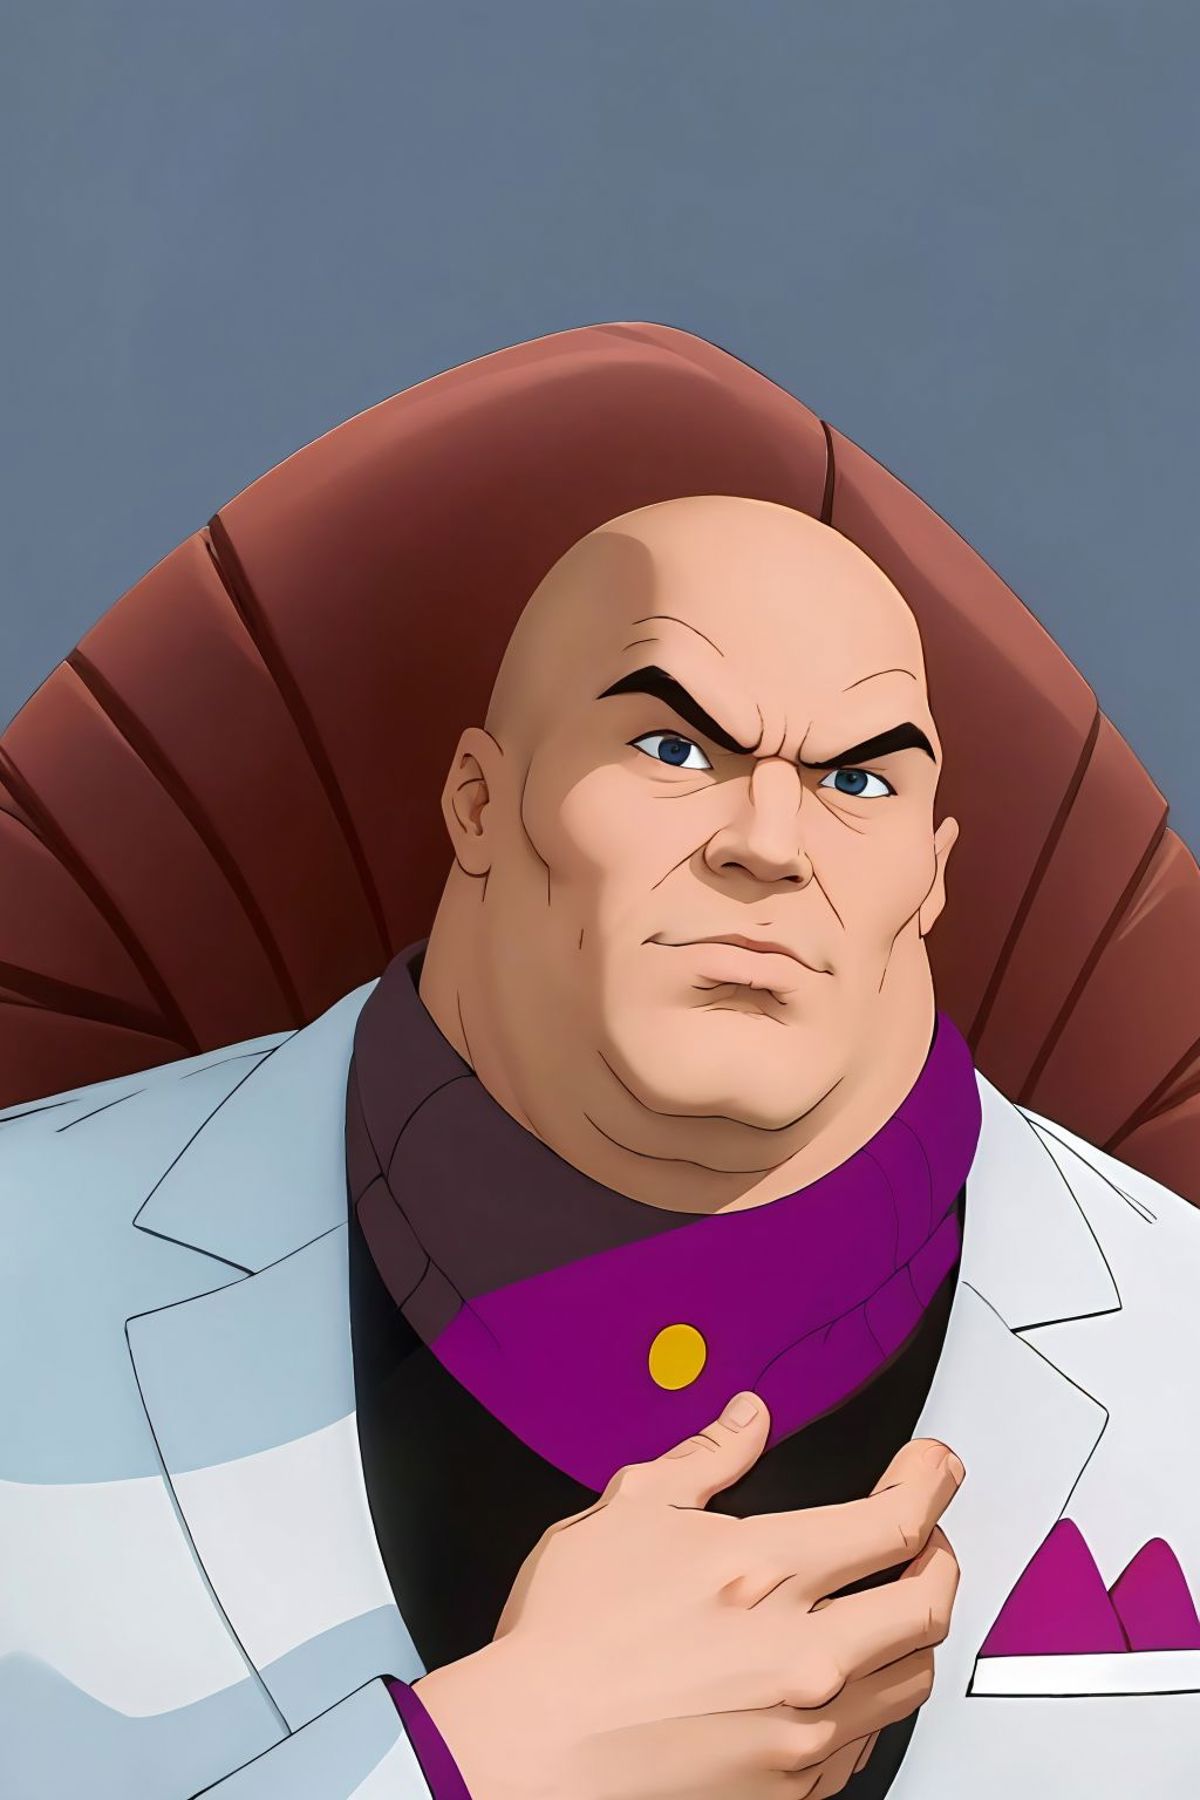 Kingpin (Spider-Man: The Animated Series) image by Montitto